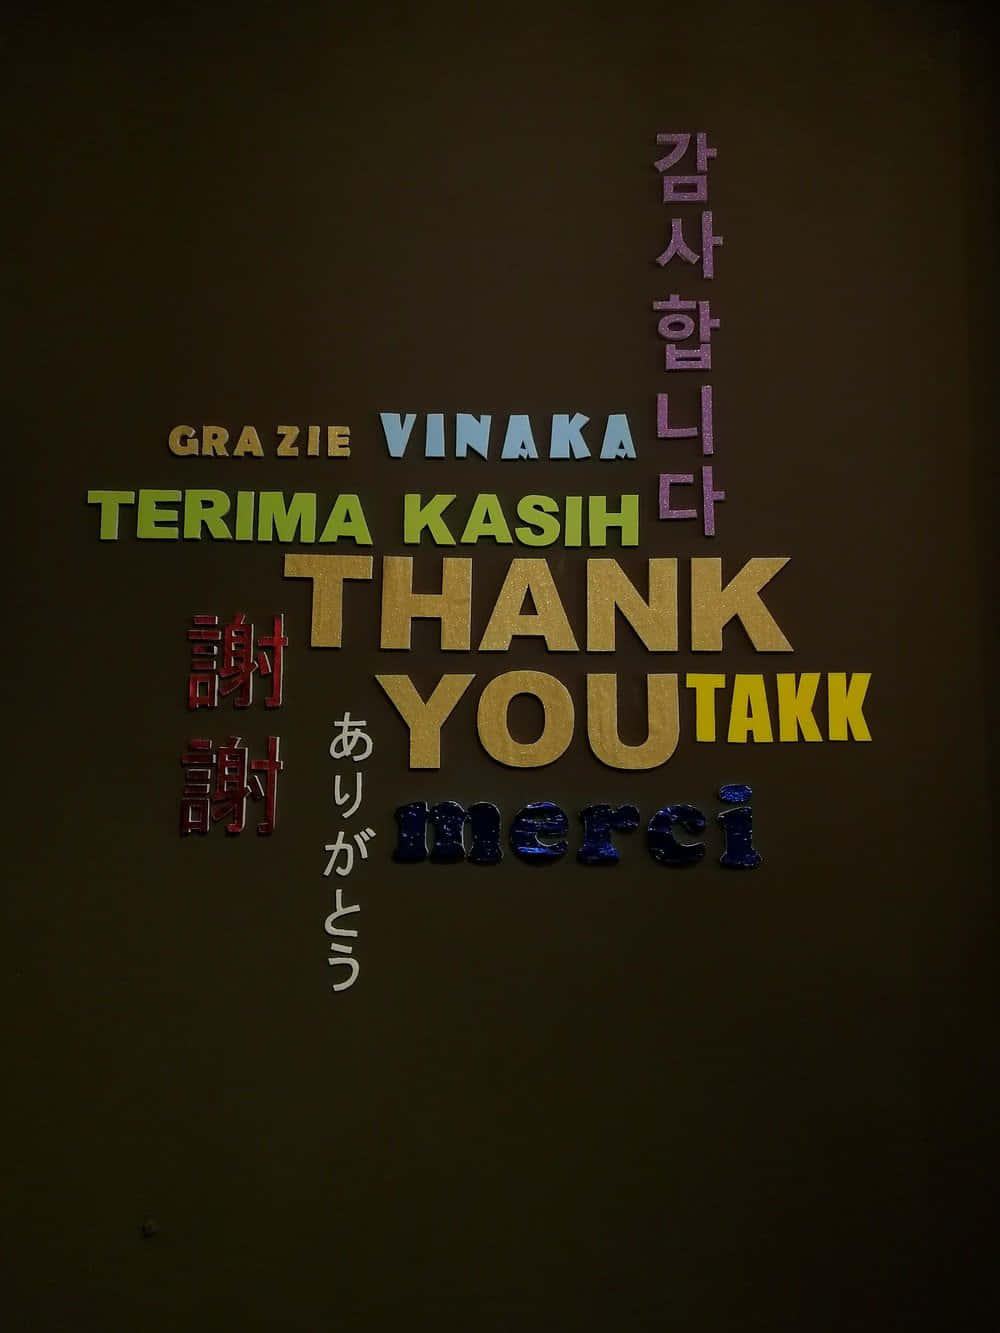 A Wall With A Sign That Says Thank You In Different Languages